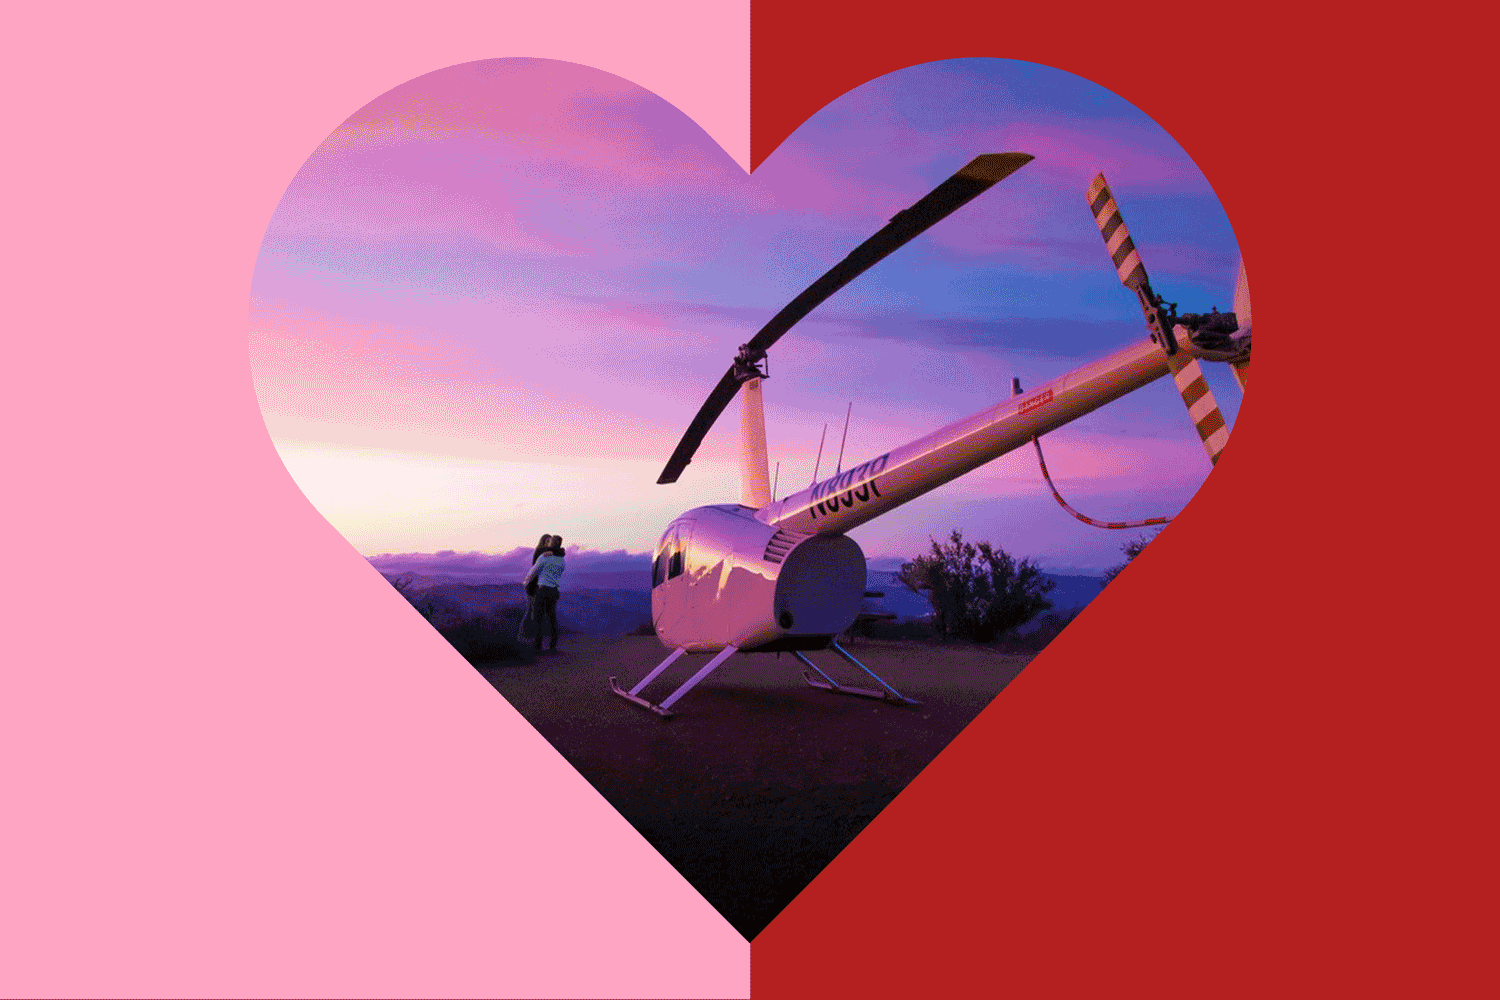 A pink and red field with a heart cut out that shows photos of a plane, beach, vineyard, garden, and cocktail bar